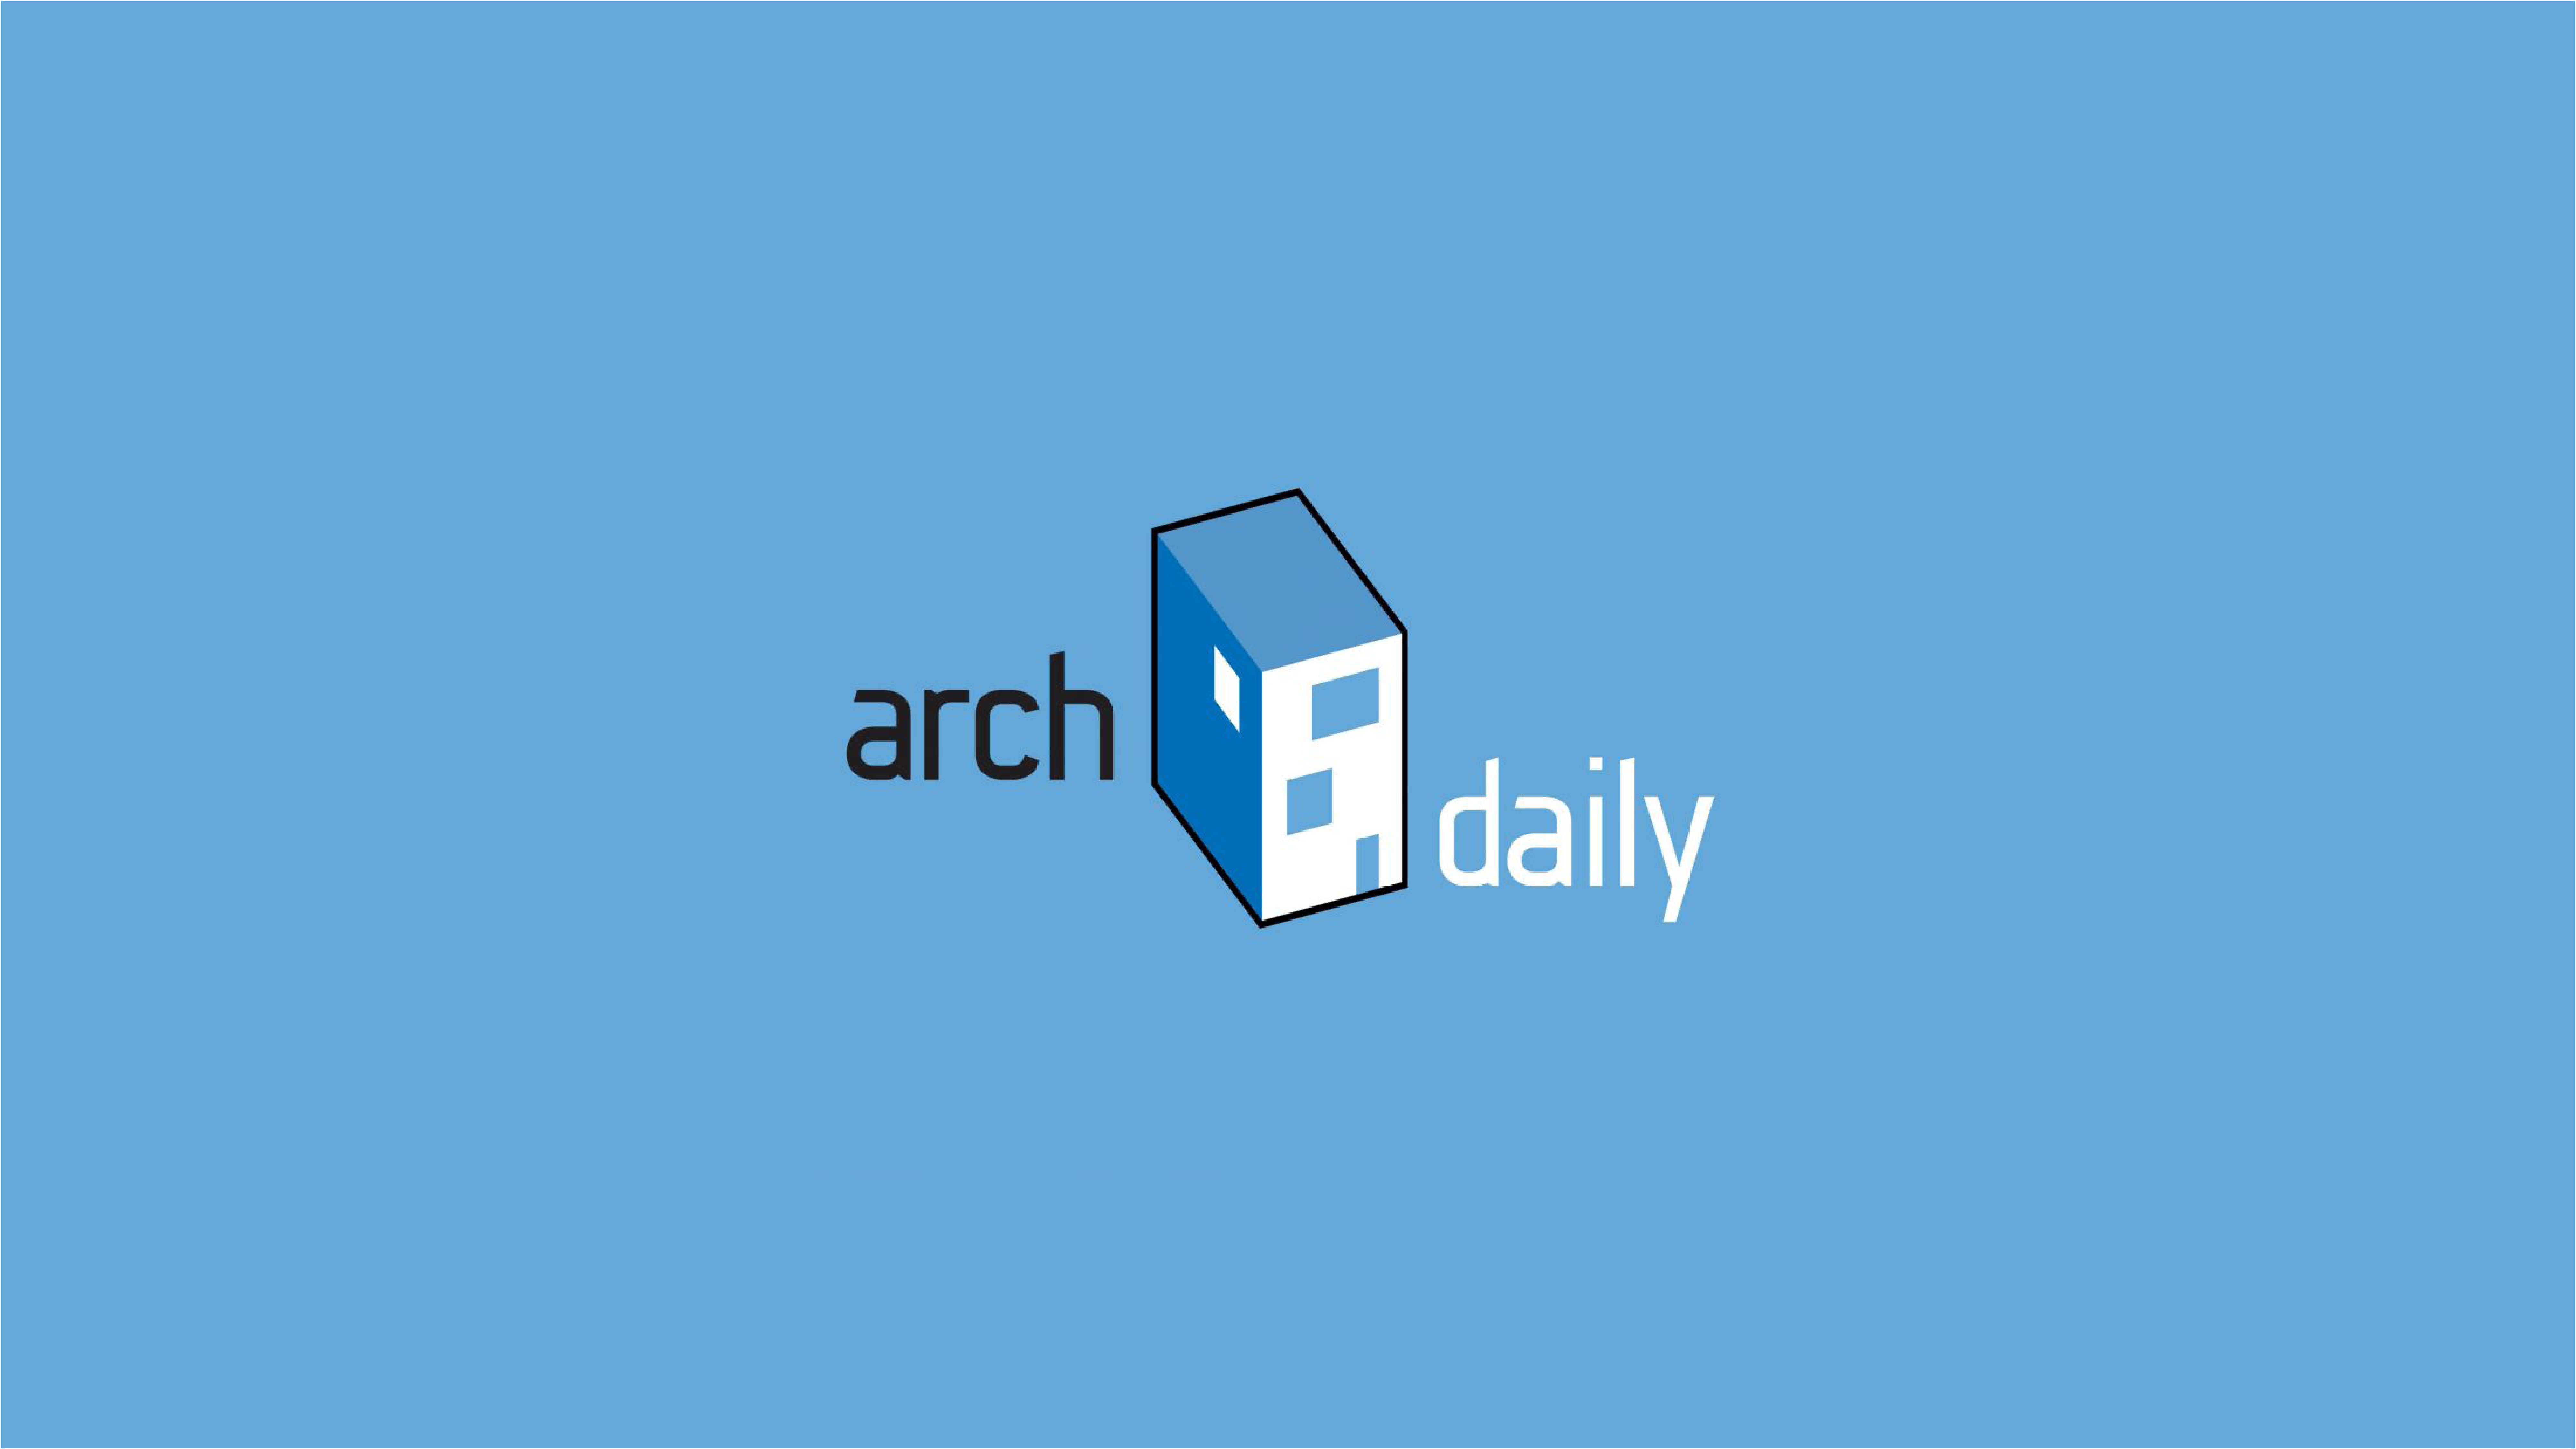 The word ArchDaily on a blue background